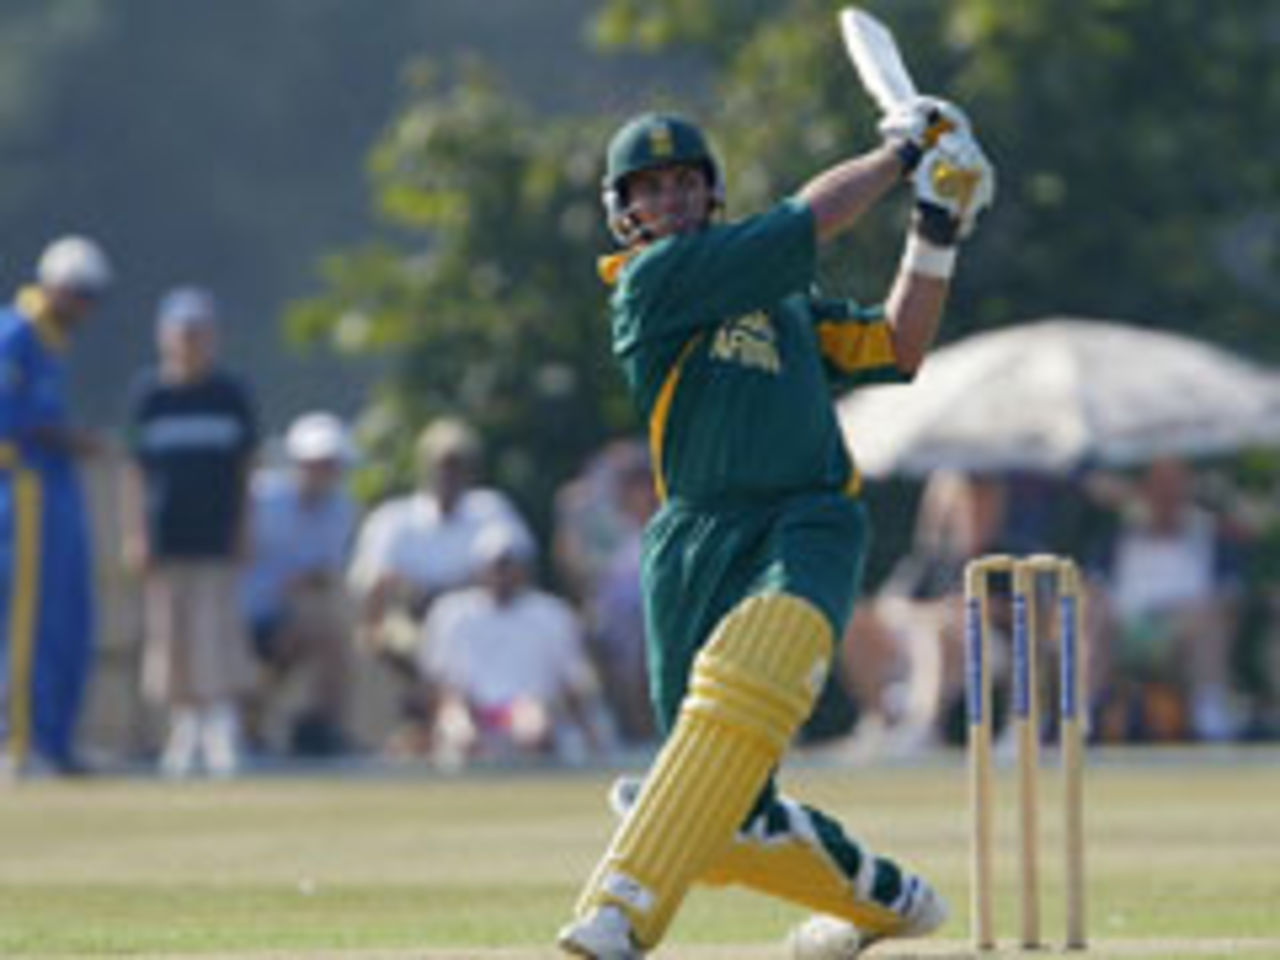 He's back: Jacques Kallis batting in the PCA XI v South Africa XI at Shenley